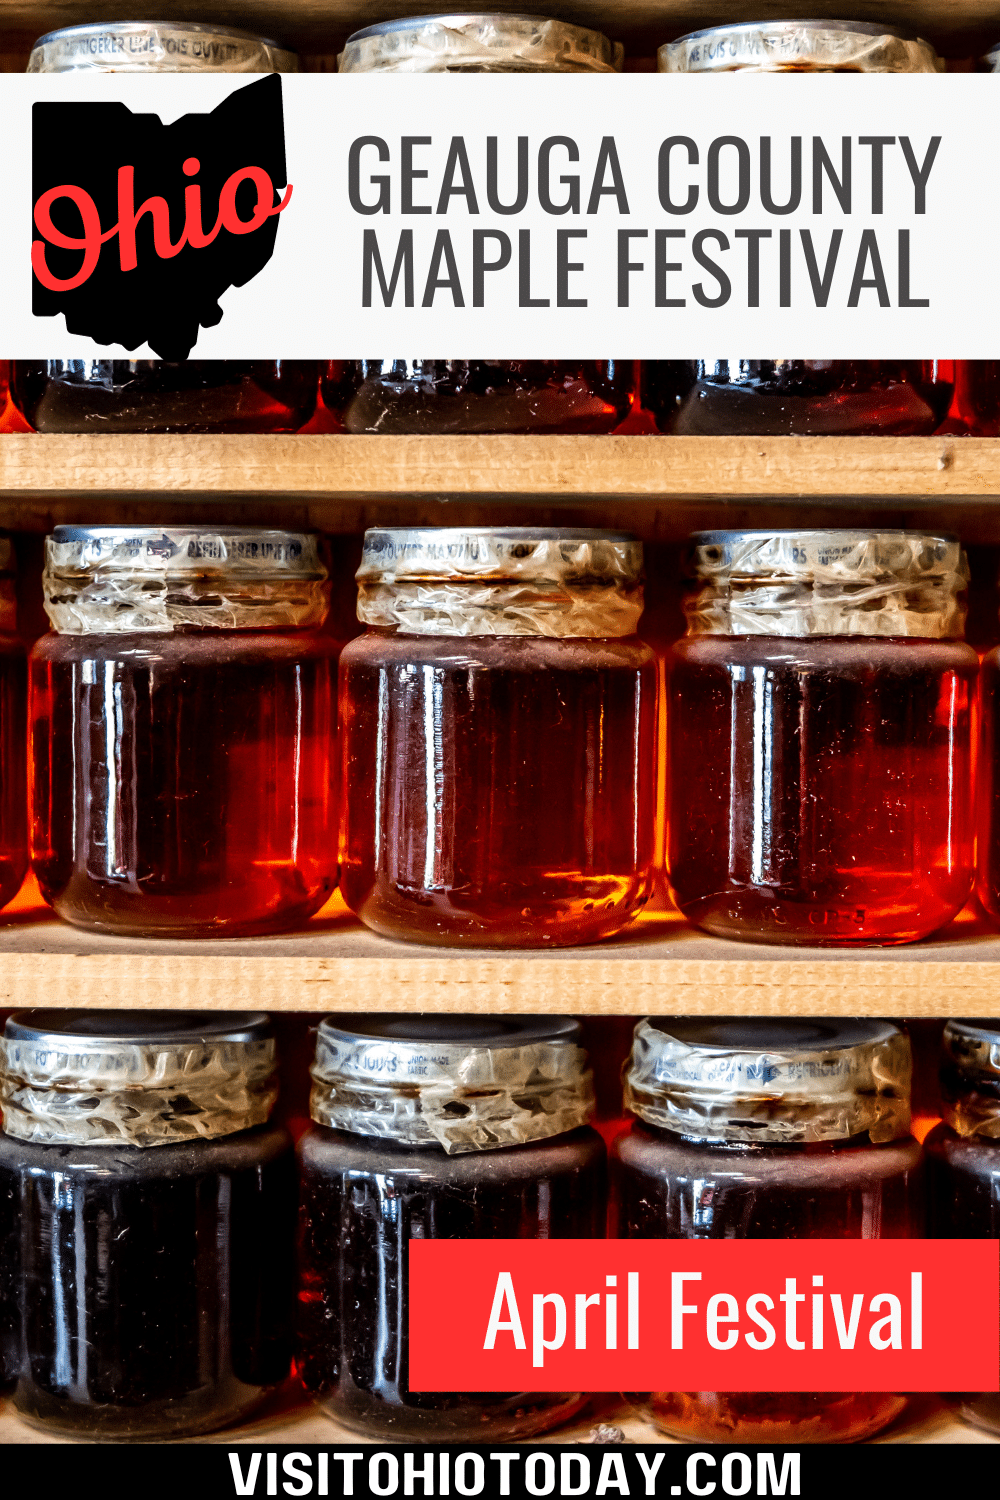 The annual Geauga County Maple Festival is a family-fun event celebrating maple syrup. It takes place at the end of April on Chardon Square in Chardon.